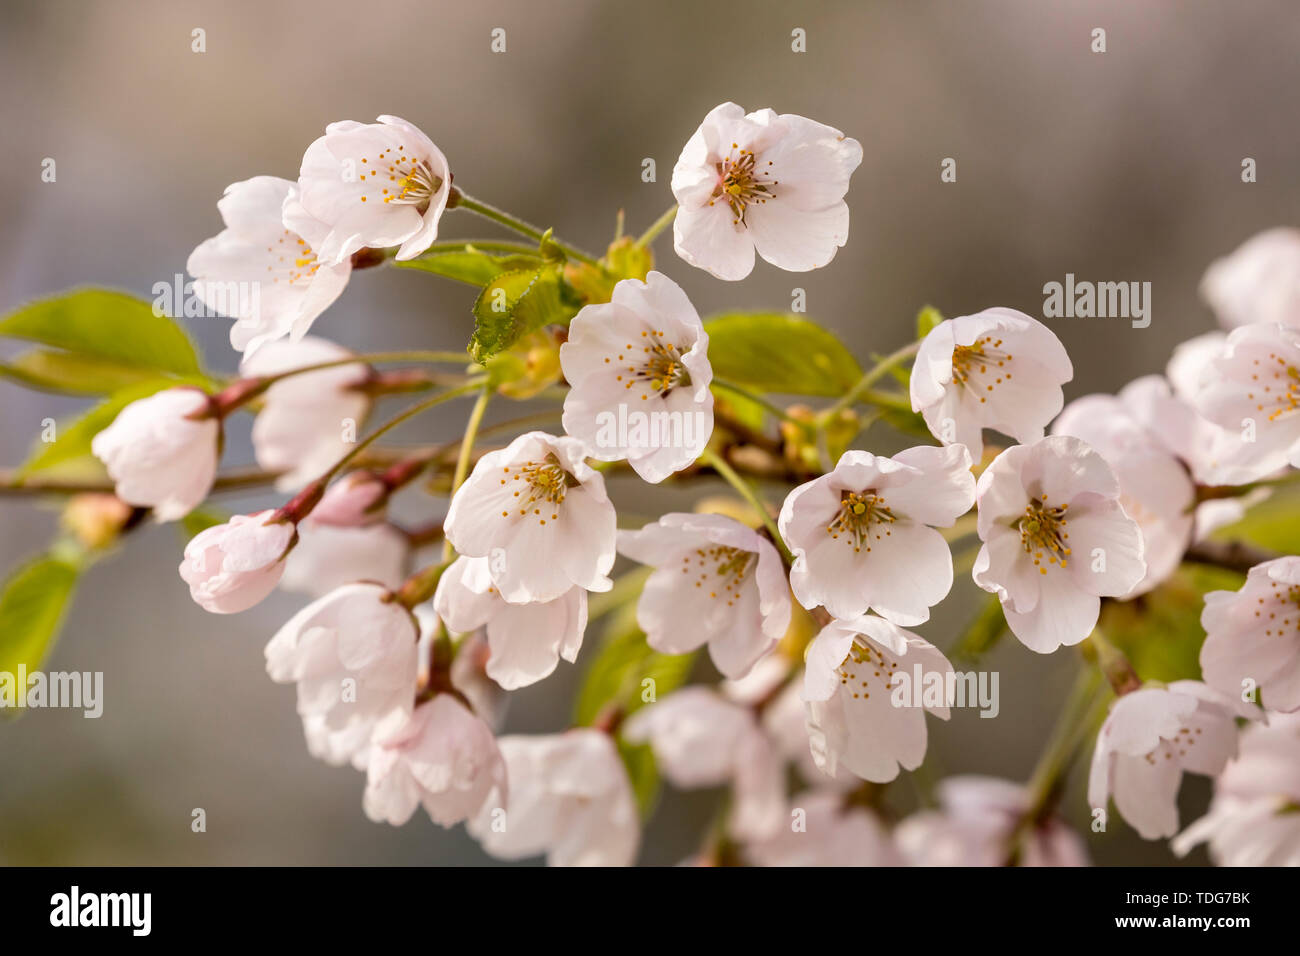 A group of white cherry blossoms with pink tint. Stock Photo